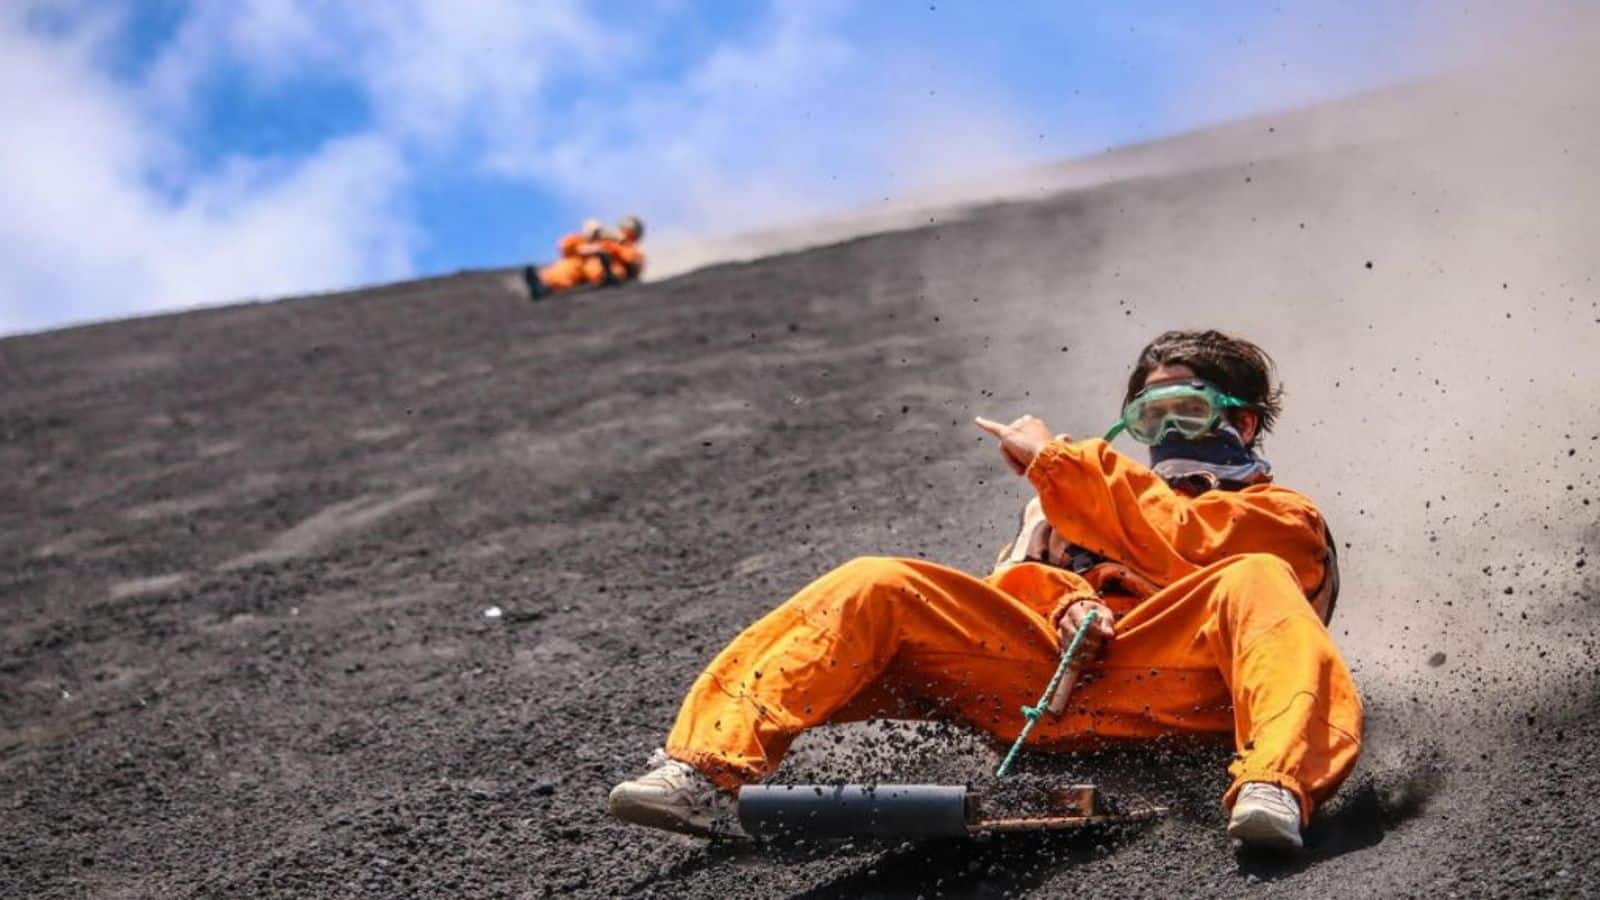 Volcano boarding in Leon, Nicaragua is an unmissable attraction